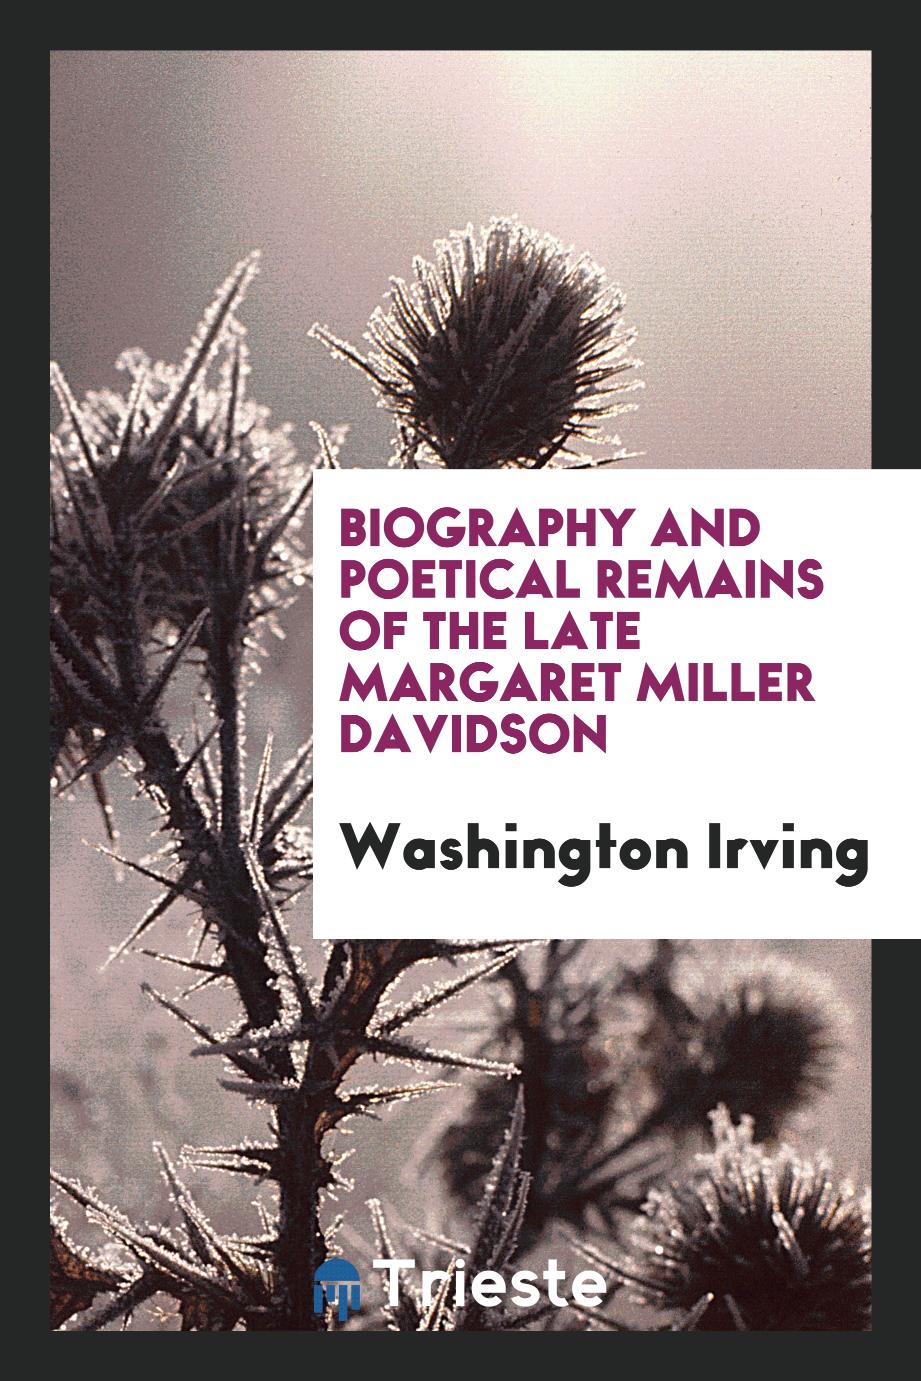 Biography and poetical remains of the late Margaret Miller Davidson